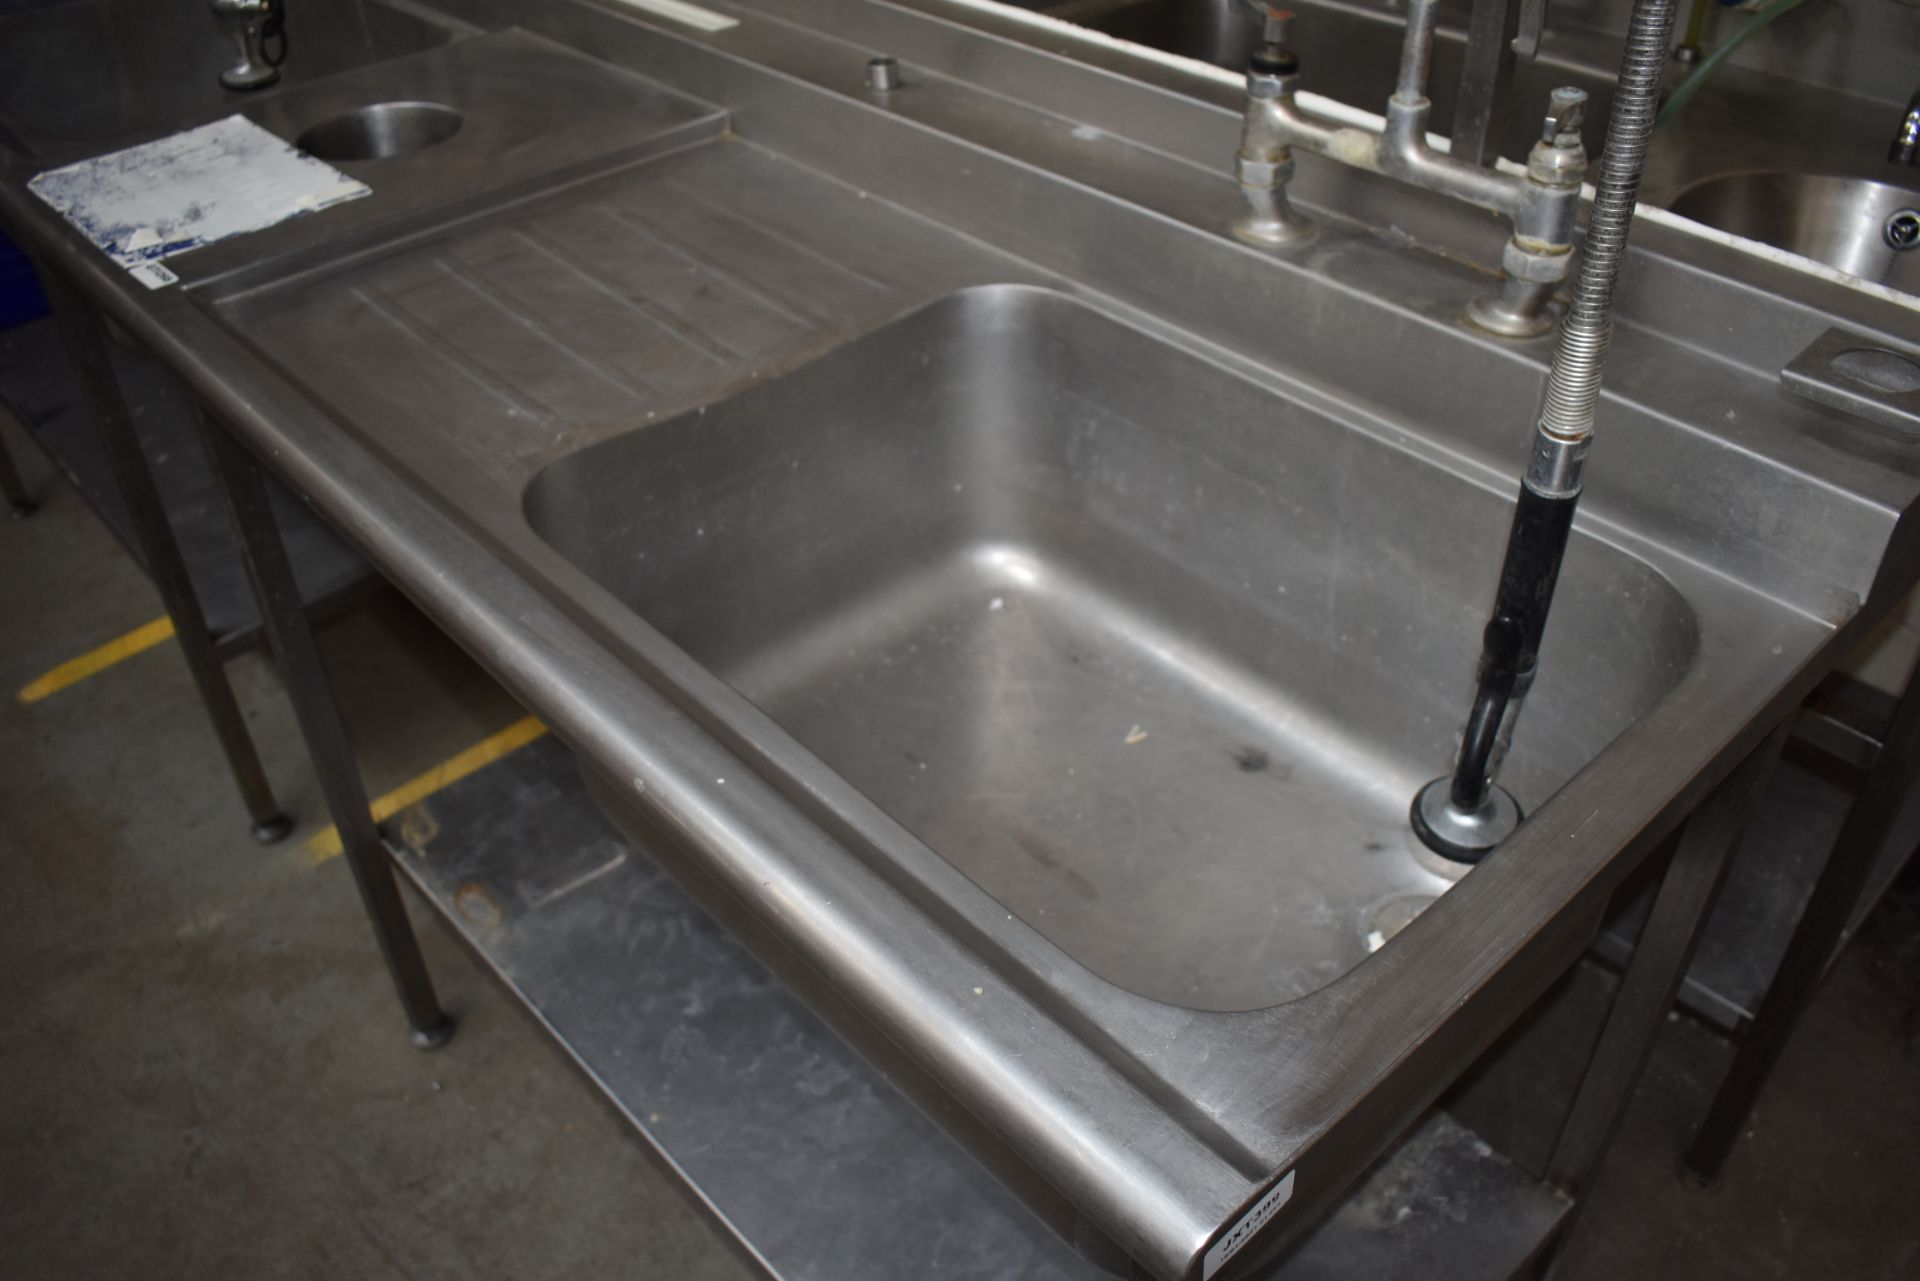 1 x Stainless Steel Commercial Wash Basin Unit With Twin Sink Bowl and Drainers, Mixer Taps, Spray H - Image 4 of 12